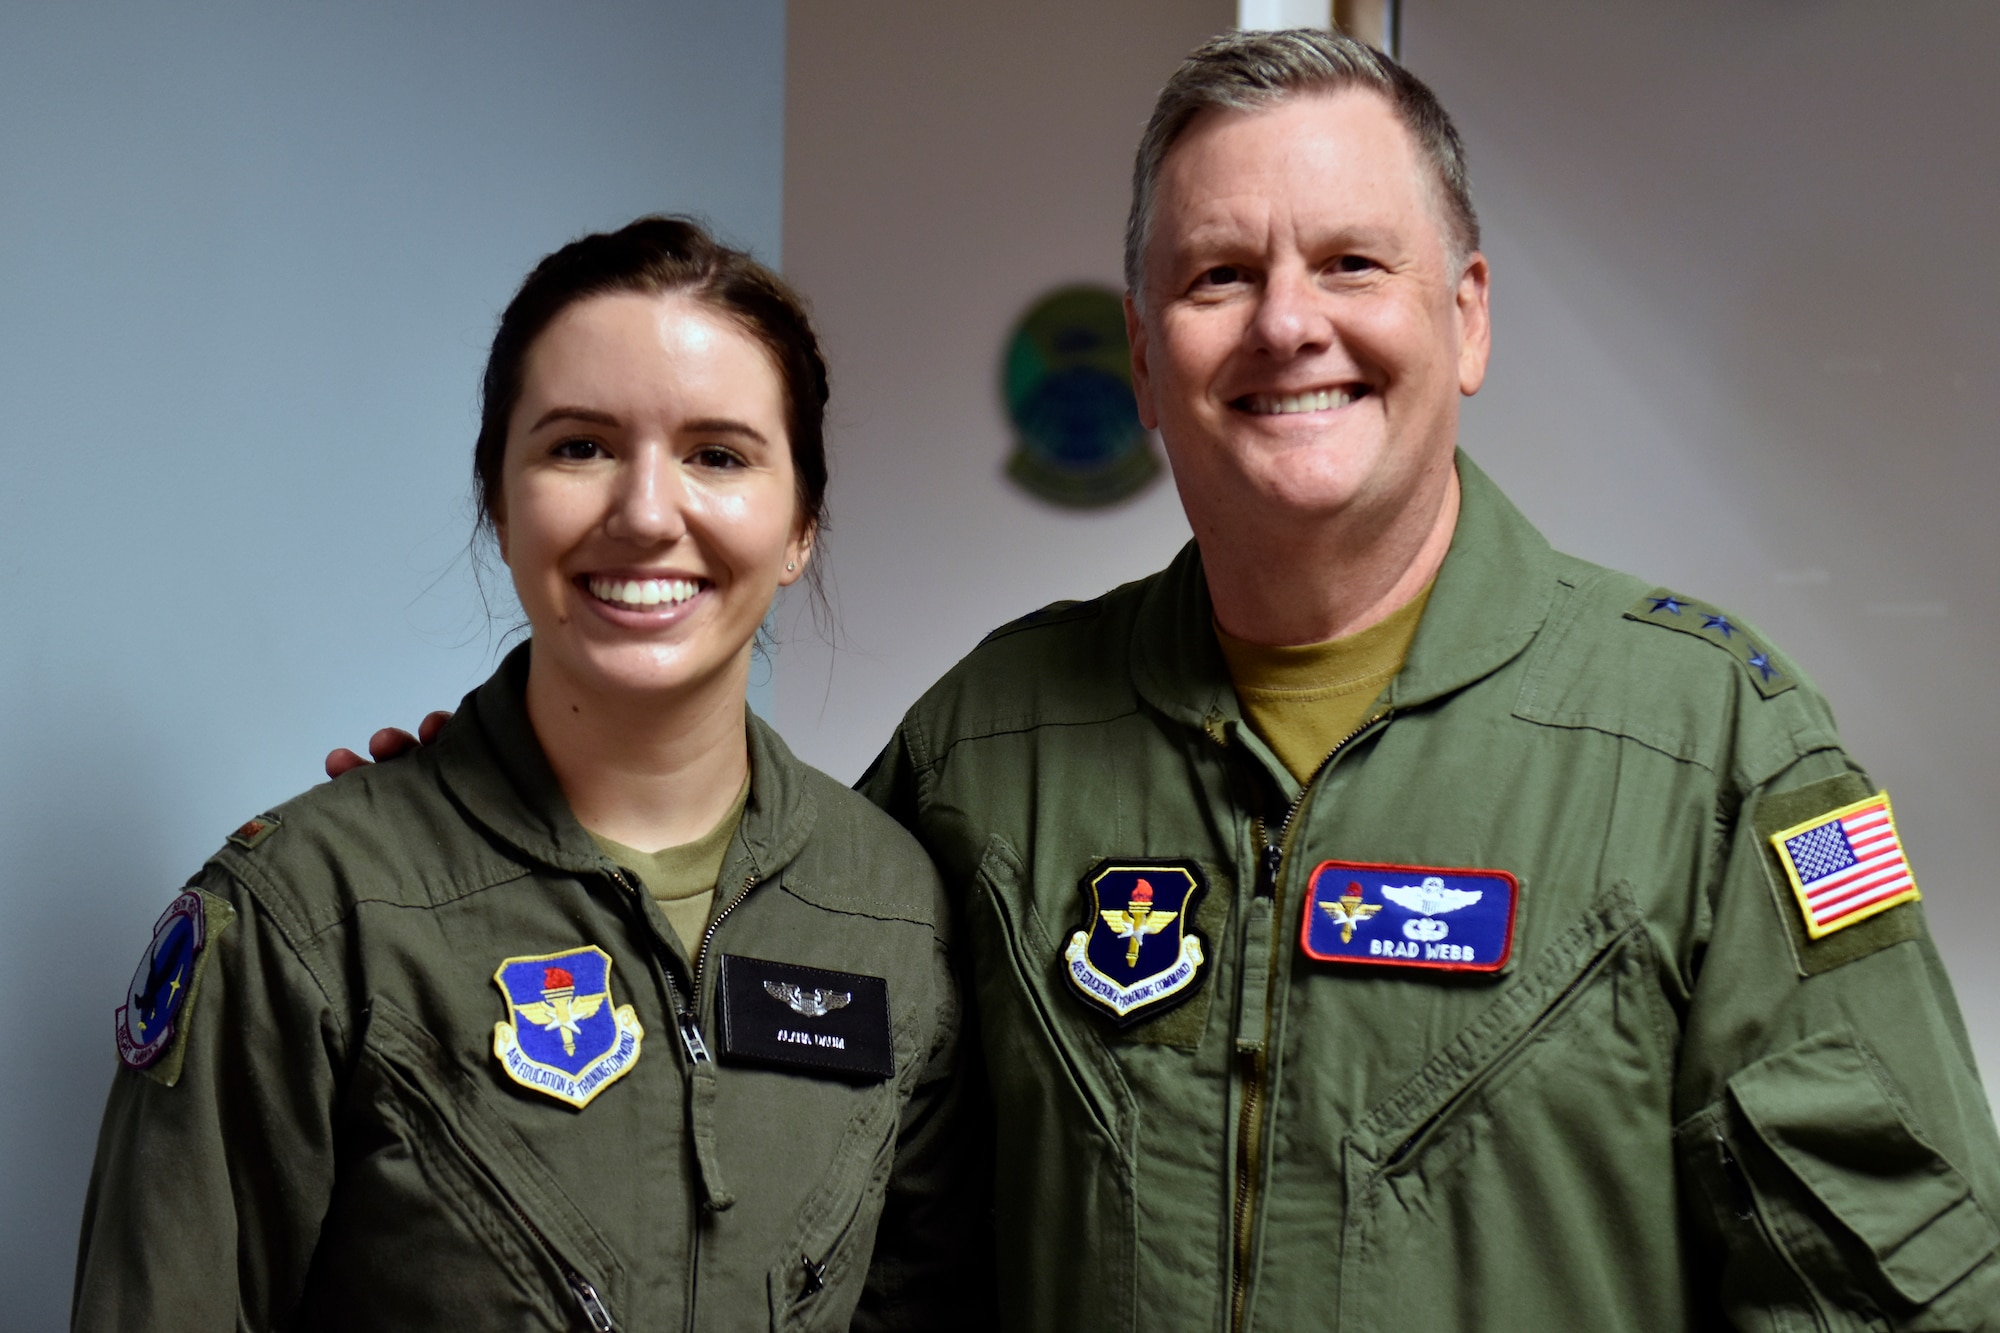 U.S. Air Force 2nd Lt. Alana Daum stands with Lt. Gen. Brad Webb, Air Education and Training Command commander, following her graduation from Specialized Undergraduate Helicopter Pilot Training, Class 21-05, at Fort Rucker, Alabama, June 22, 2021. Seven officers received their pilot’s wings, becoming the first Air Force officers to earn their wings from a helicopter-only syllabus since 1993. HTN is one initiative of the Pilot Training Transformation effort and was developed to create quality pilots, while increasing the Air Force’s overall pilot production. The HTN graduates began their training August 2020 as part of a small group who went directly to Fort Rucker for TH-1 training. HTN is one aspect of the AETC Pilot Training Transformation efforts that include Undergraduate Pilot Training 2.5, Accelerated Path to Wings, Remote SIM Instruction, Civil Path to Wings and Alternate Path to Wings.